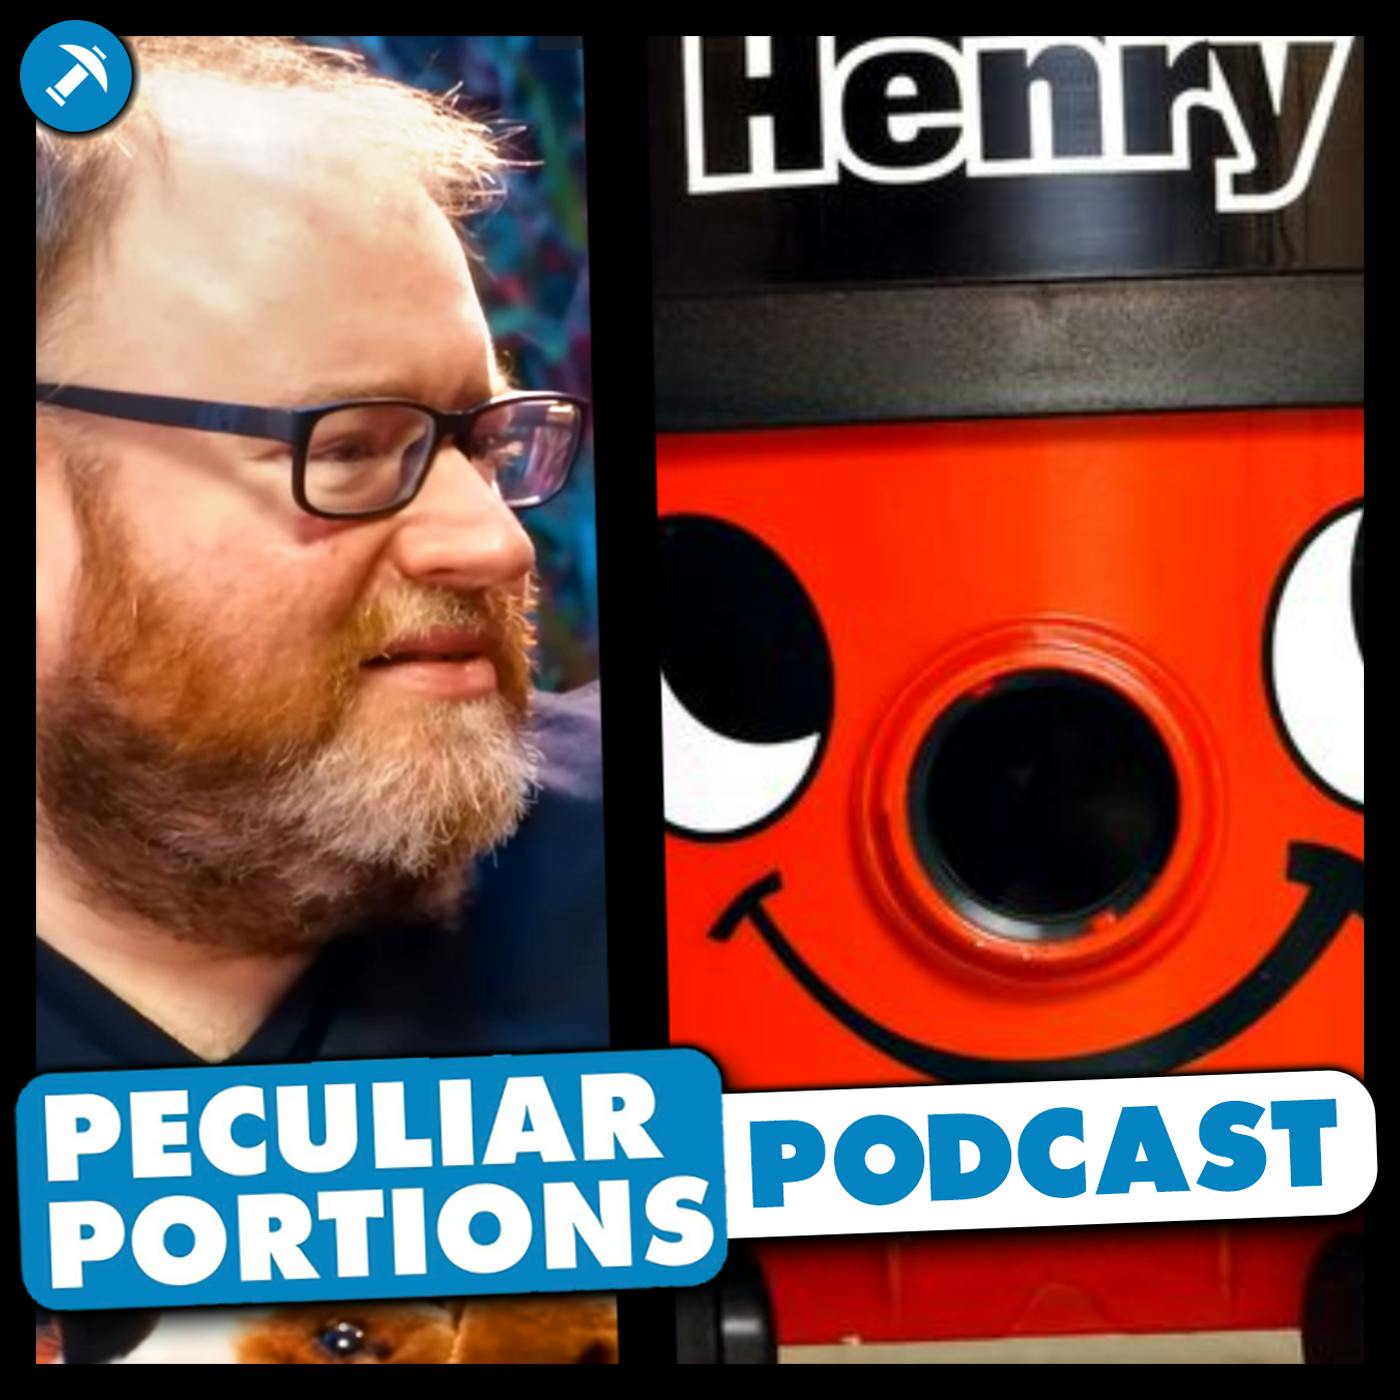 Vicar makes special friends with hoover - Peculiar Portions Podcast #70